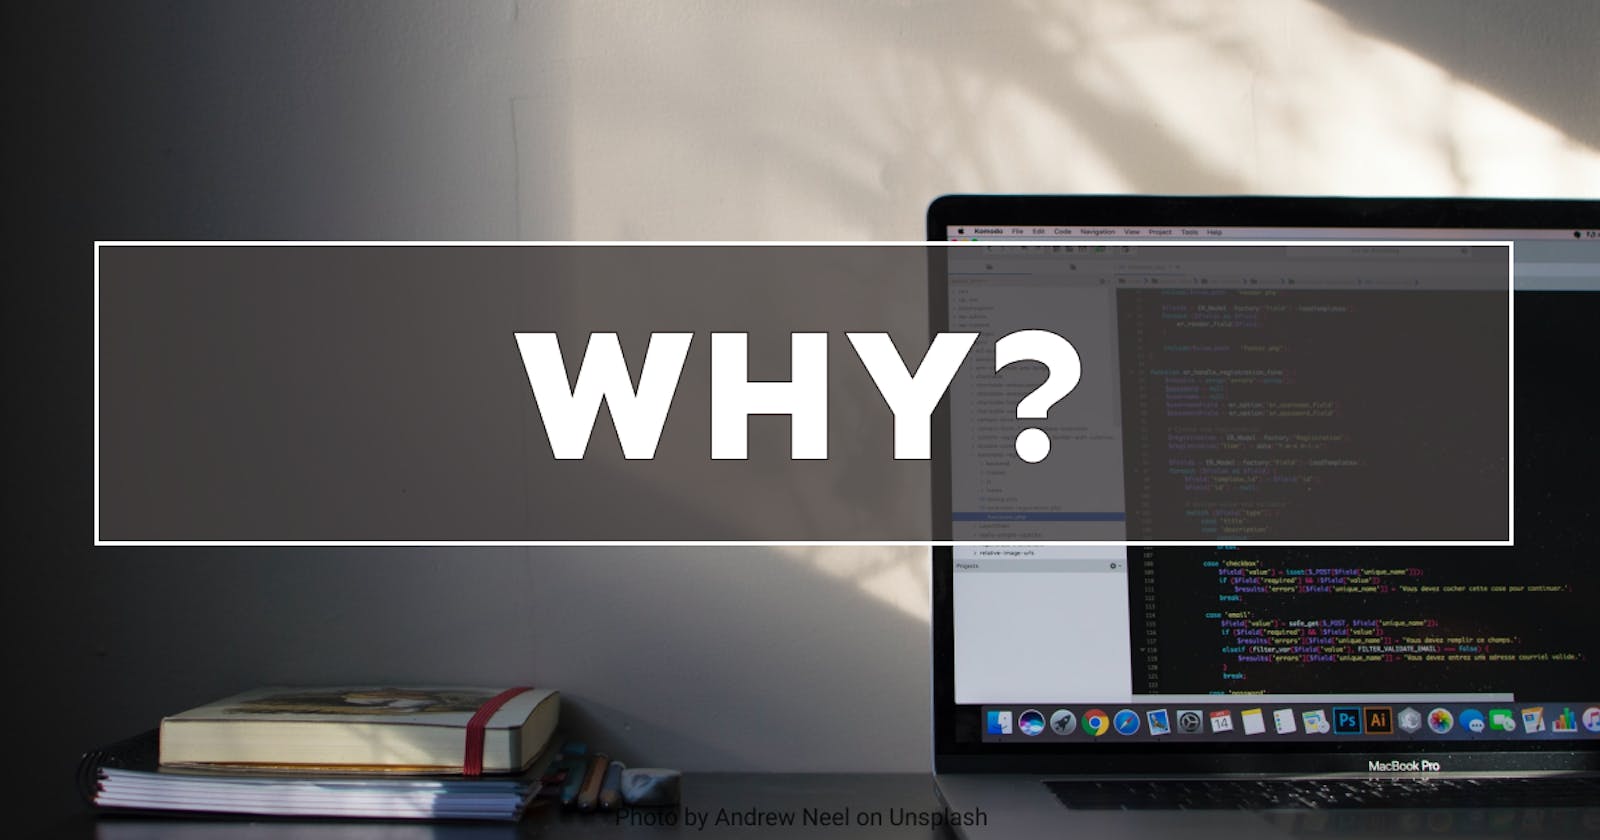 Why this blog?